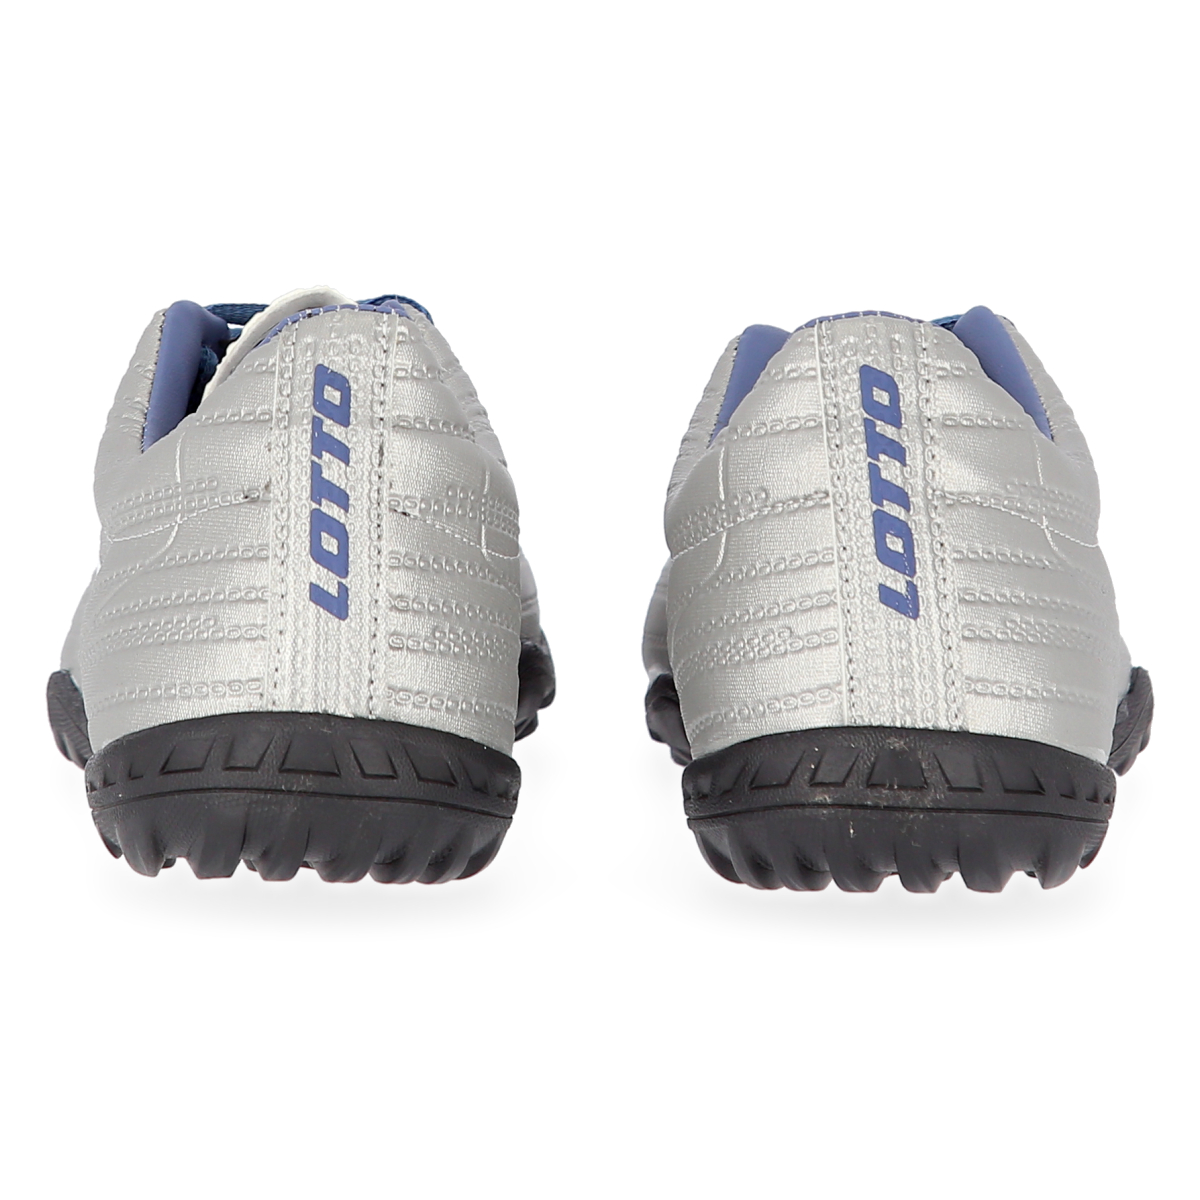 Botines Fútbol Lotto Solista Sof 800 Turf Hombre,  image number null